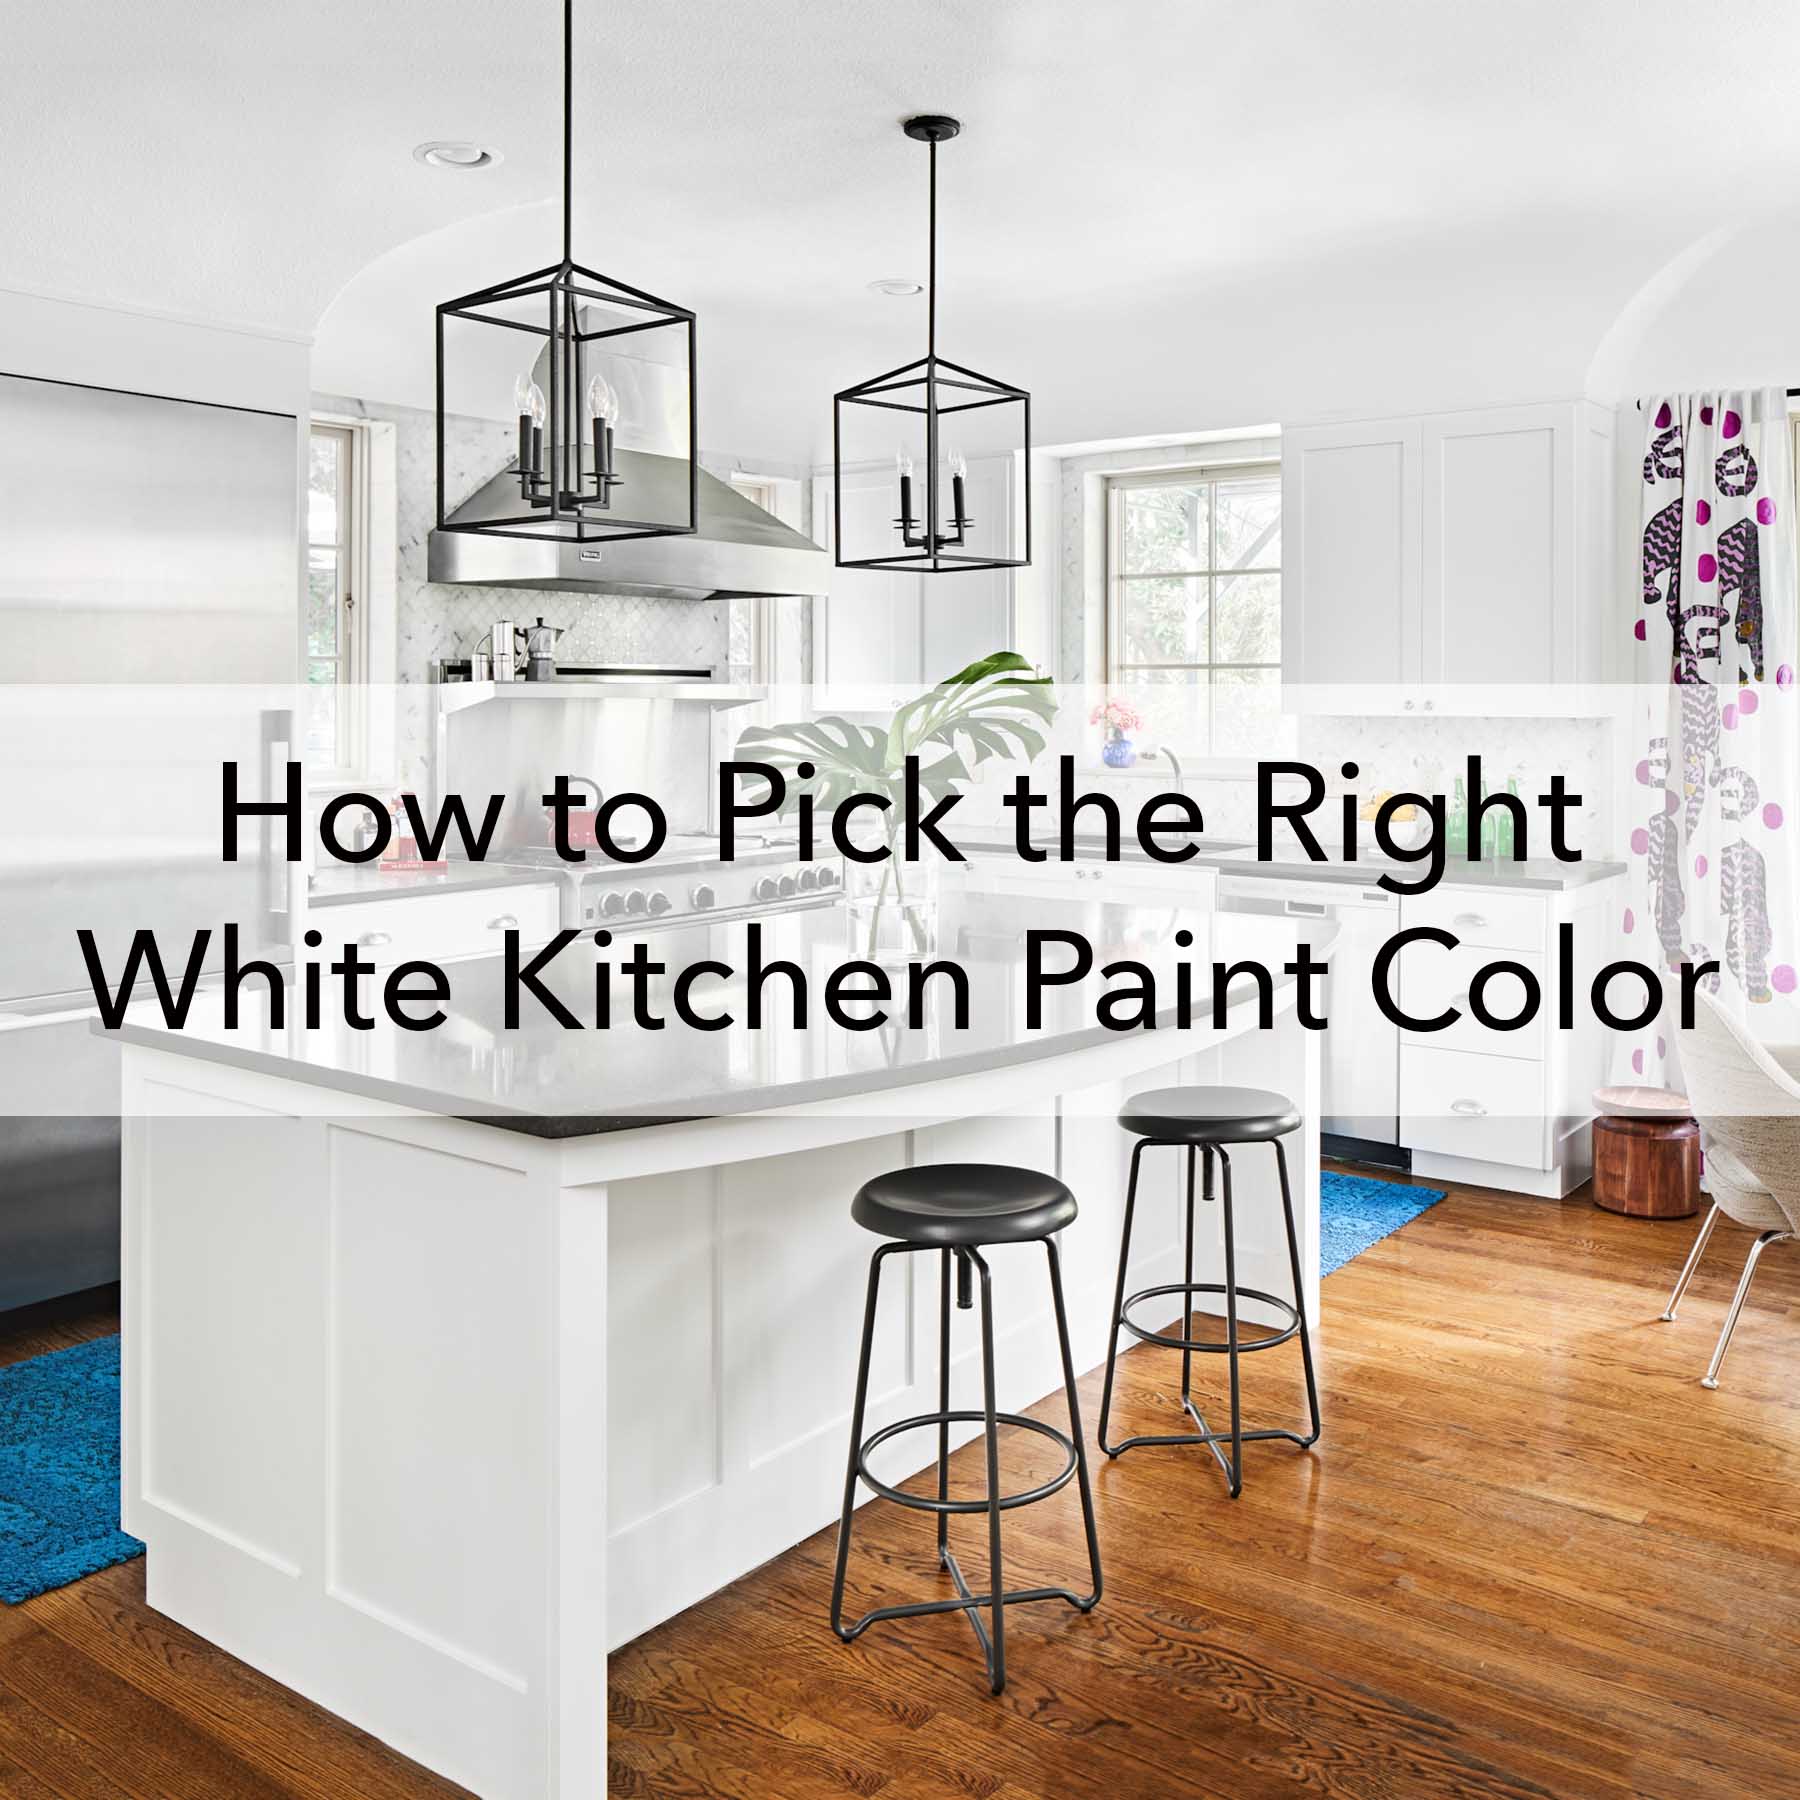 White Kitchen Paint Color blog - how to pick, Paper Moon Painting